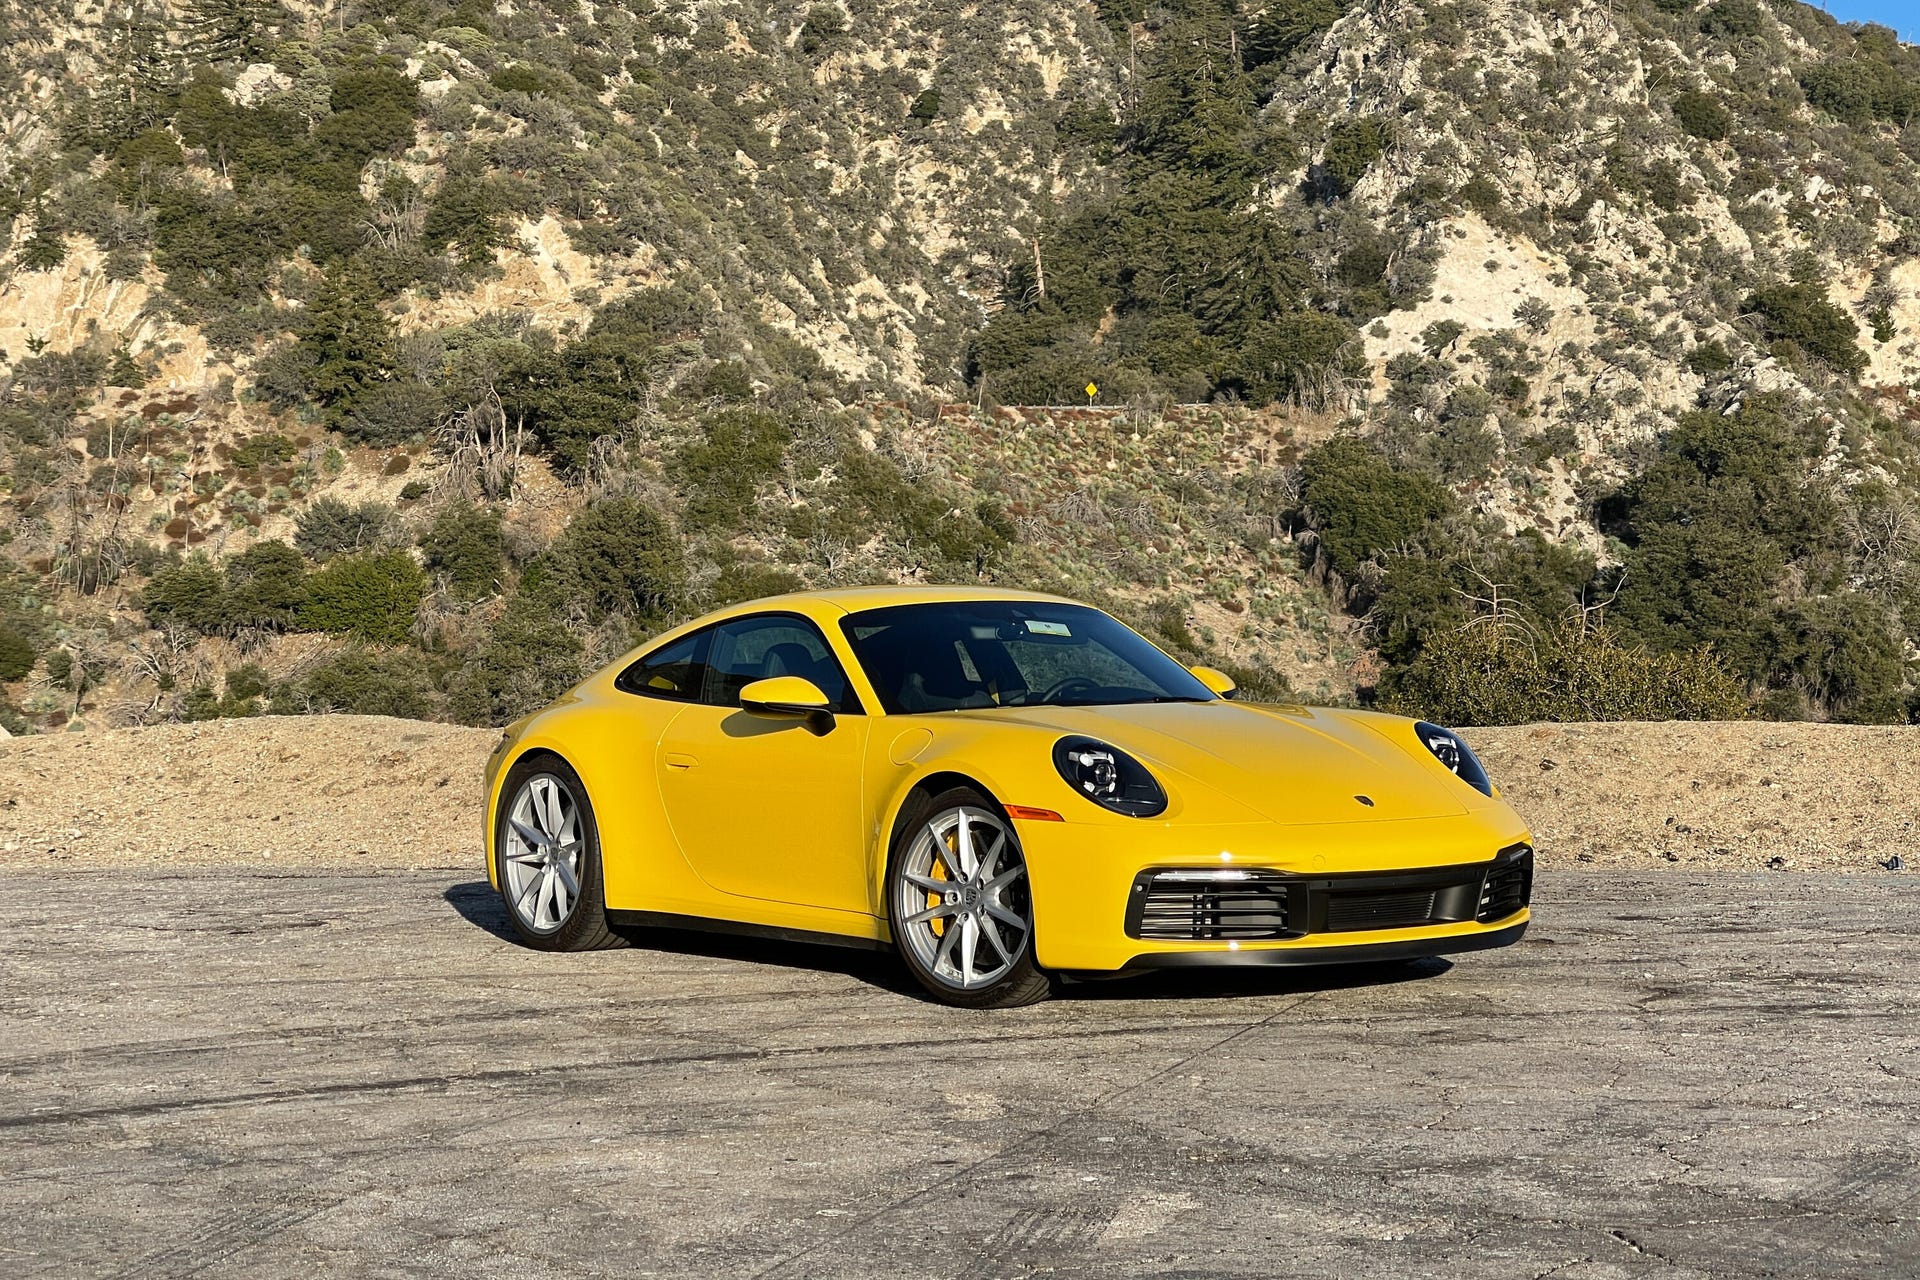 Driving a Porsche 911 for the first time more than lived up to the hype -  CNET